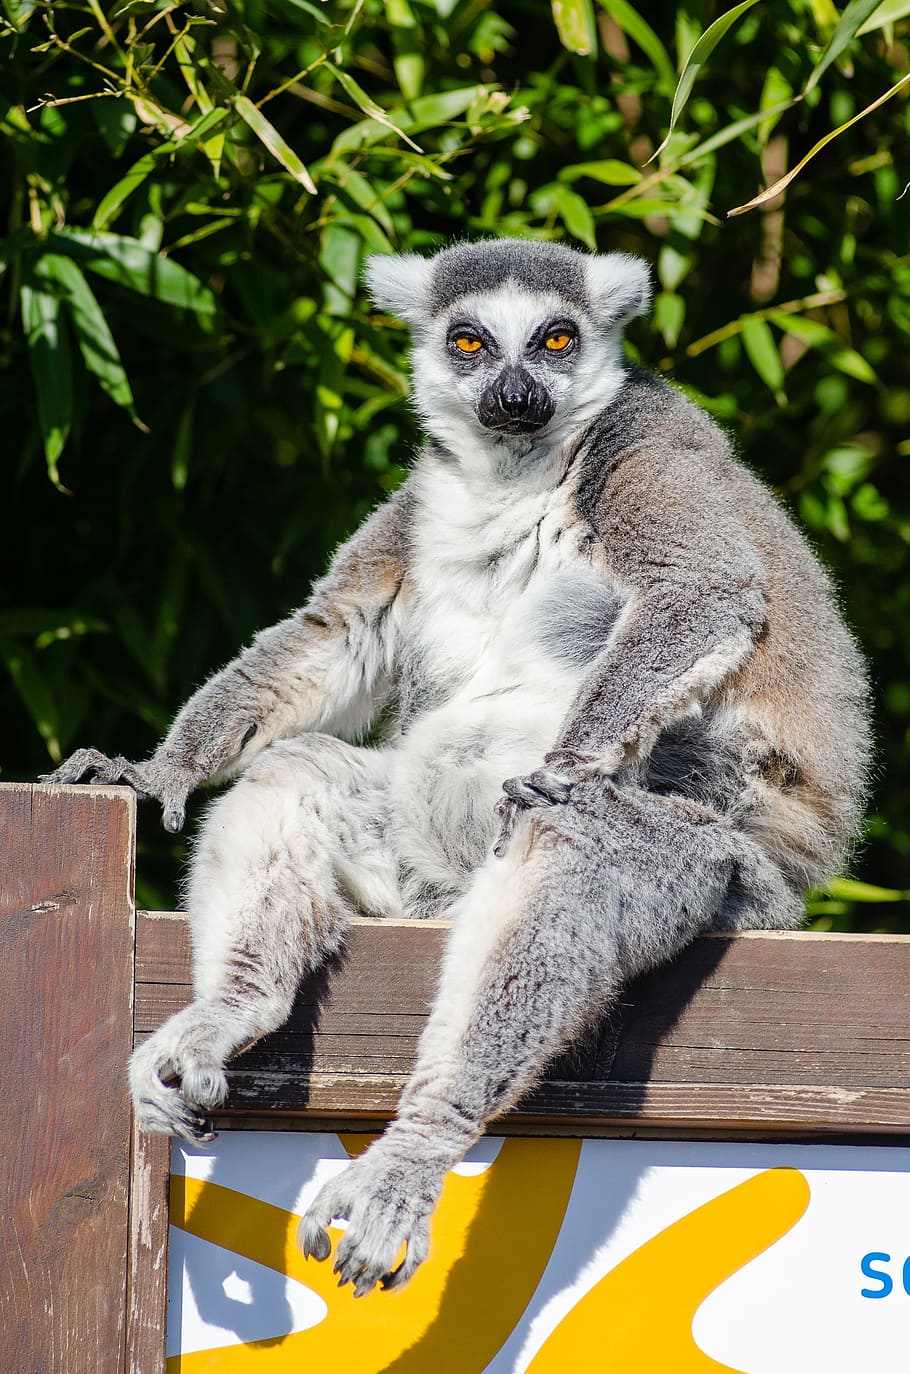 lemur, sitting, wooden, surface, madagascar, primate, monkey, funny, curious, cute